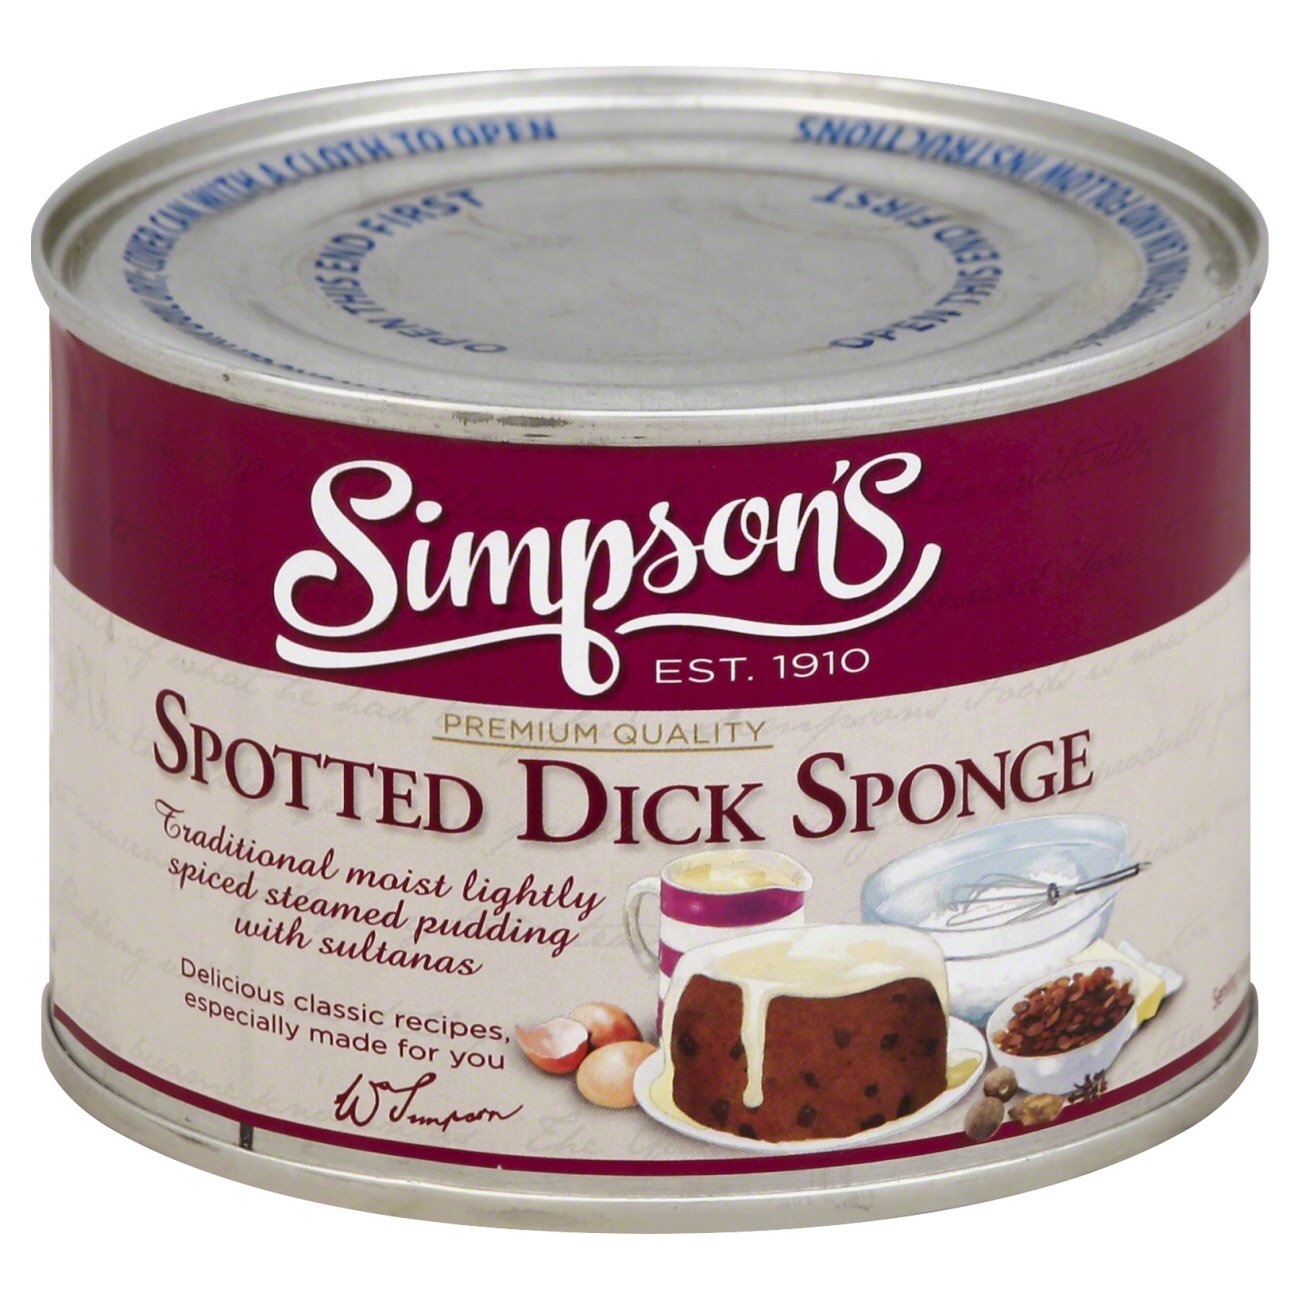 Simpsons Spotted Dick Sponge Shop Cakes At H E B